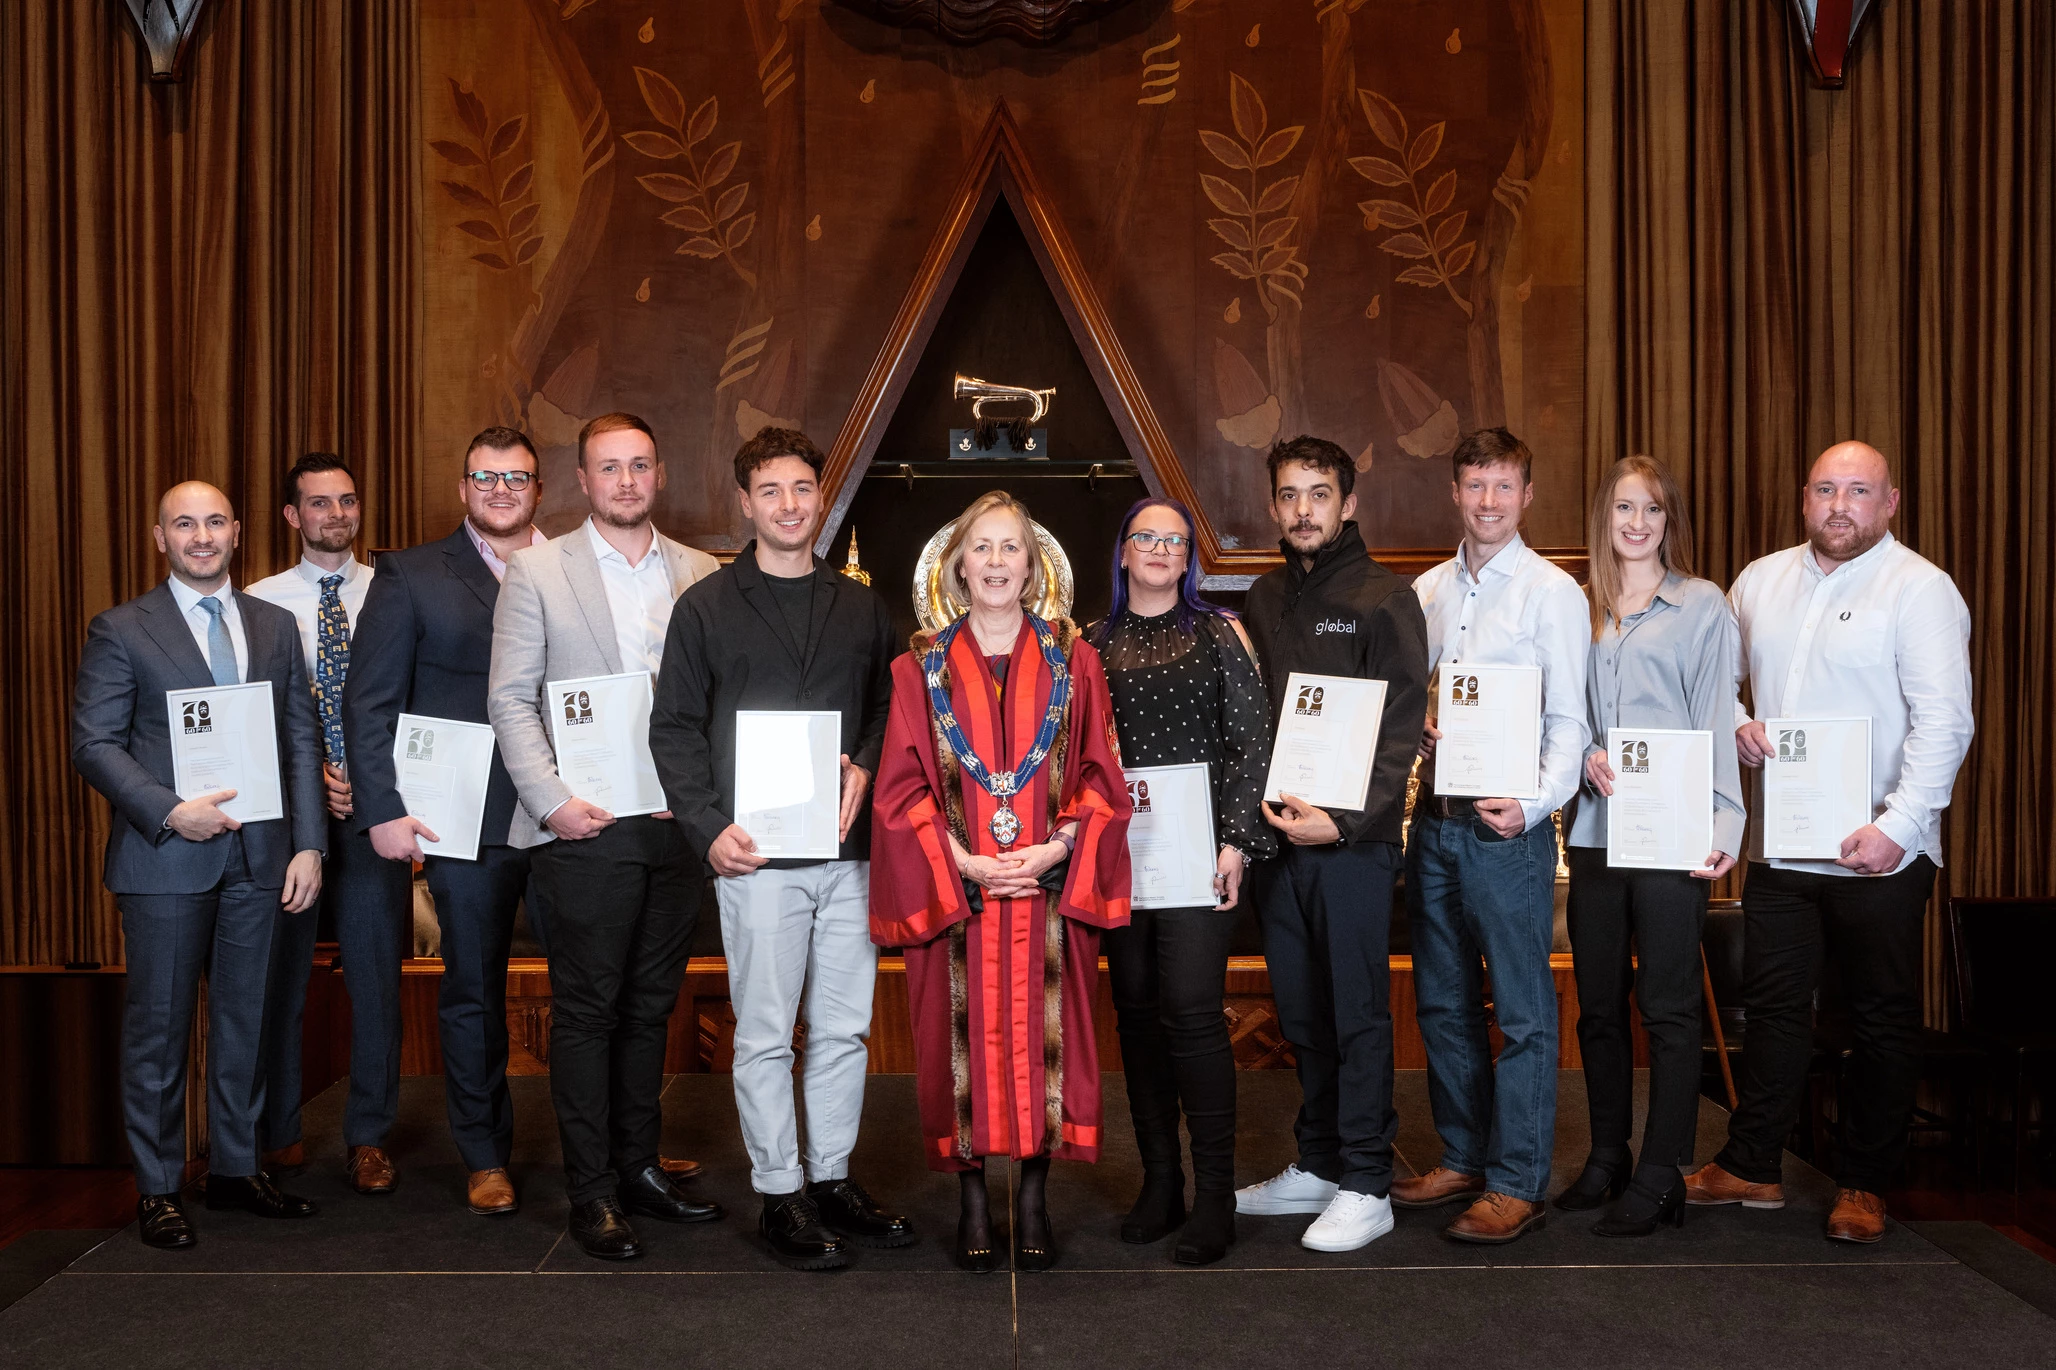 Amanda Waring, Master of the Furniture Makers’ Company, with some of the winners of the Furniture Makers’ Company’s ‘60 for 60’ in Yorkshire